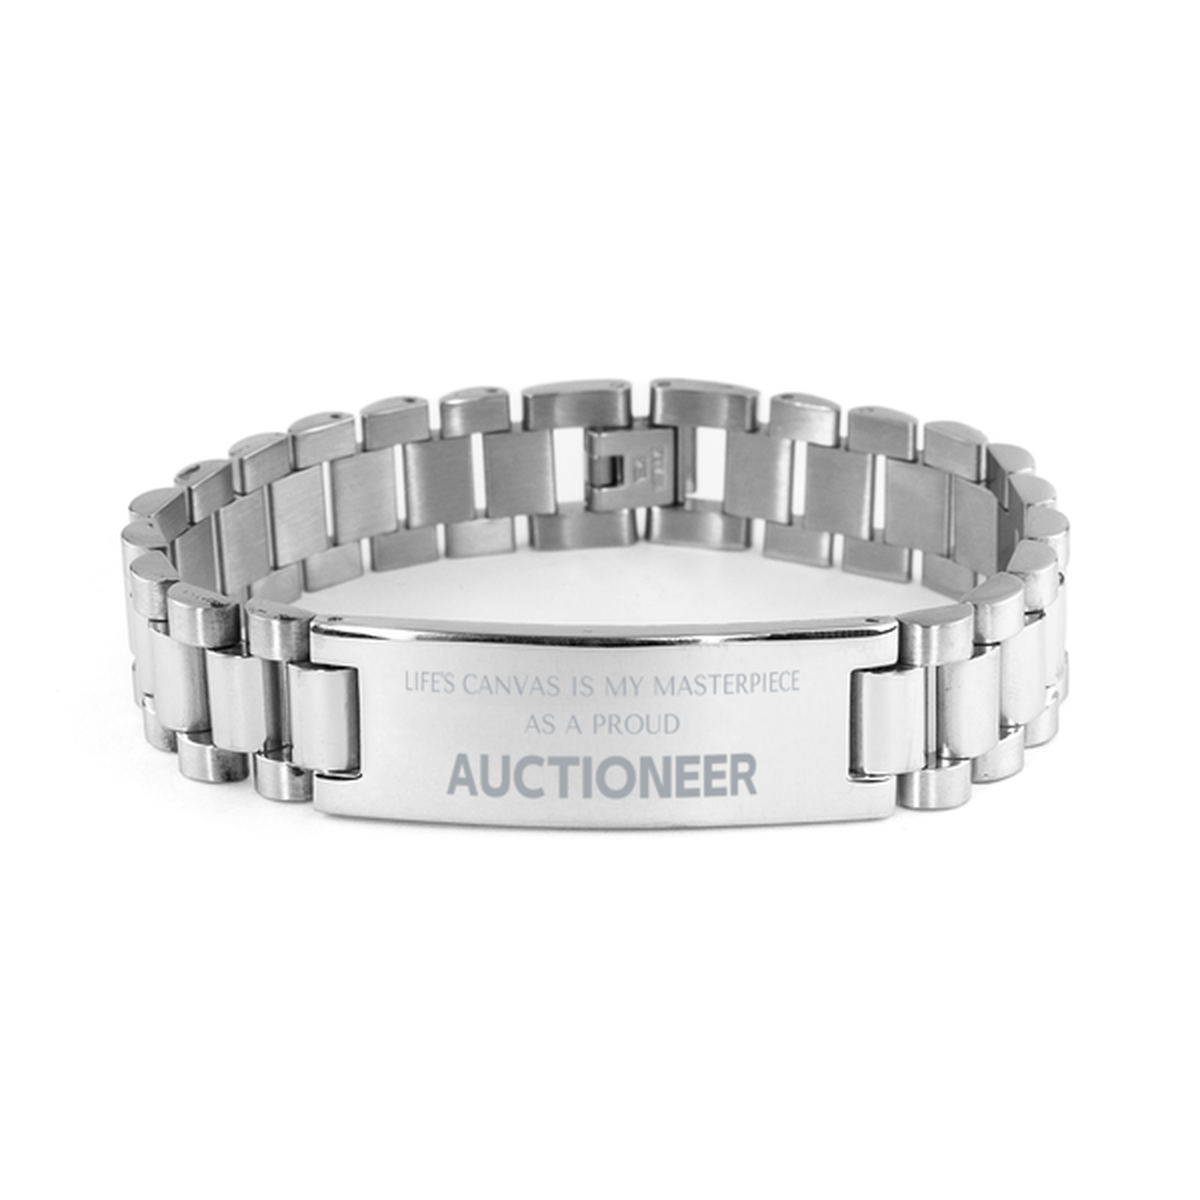 Proud Auctioneer Gifts, Life's canvas is my masterpiece, Epic Birthday Christmas Unique Ladder Stainless Steel Bracelet For Auctioneer, Coworkers, Men, Women, Friends